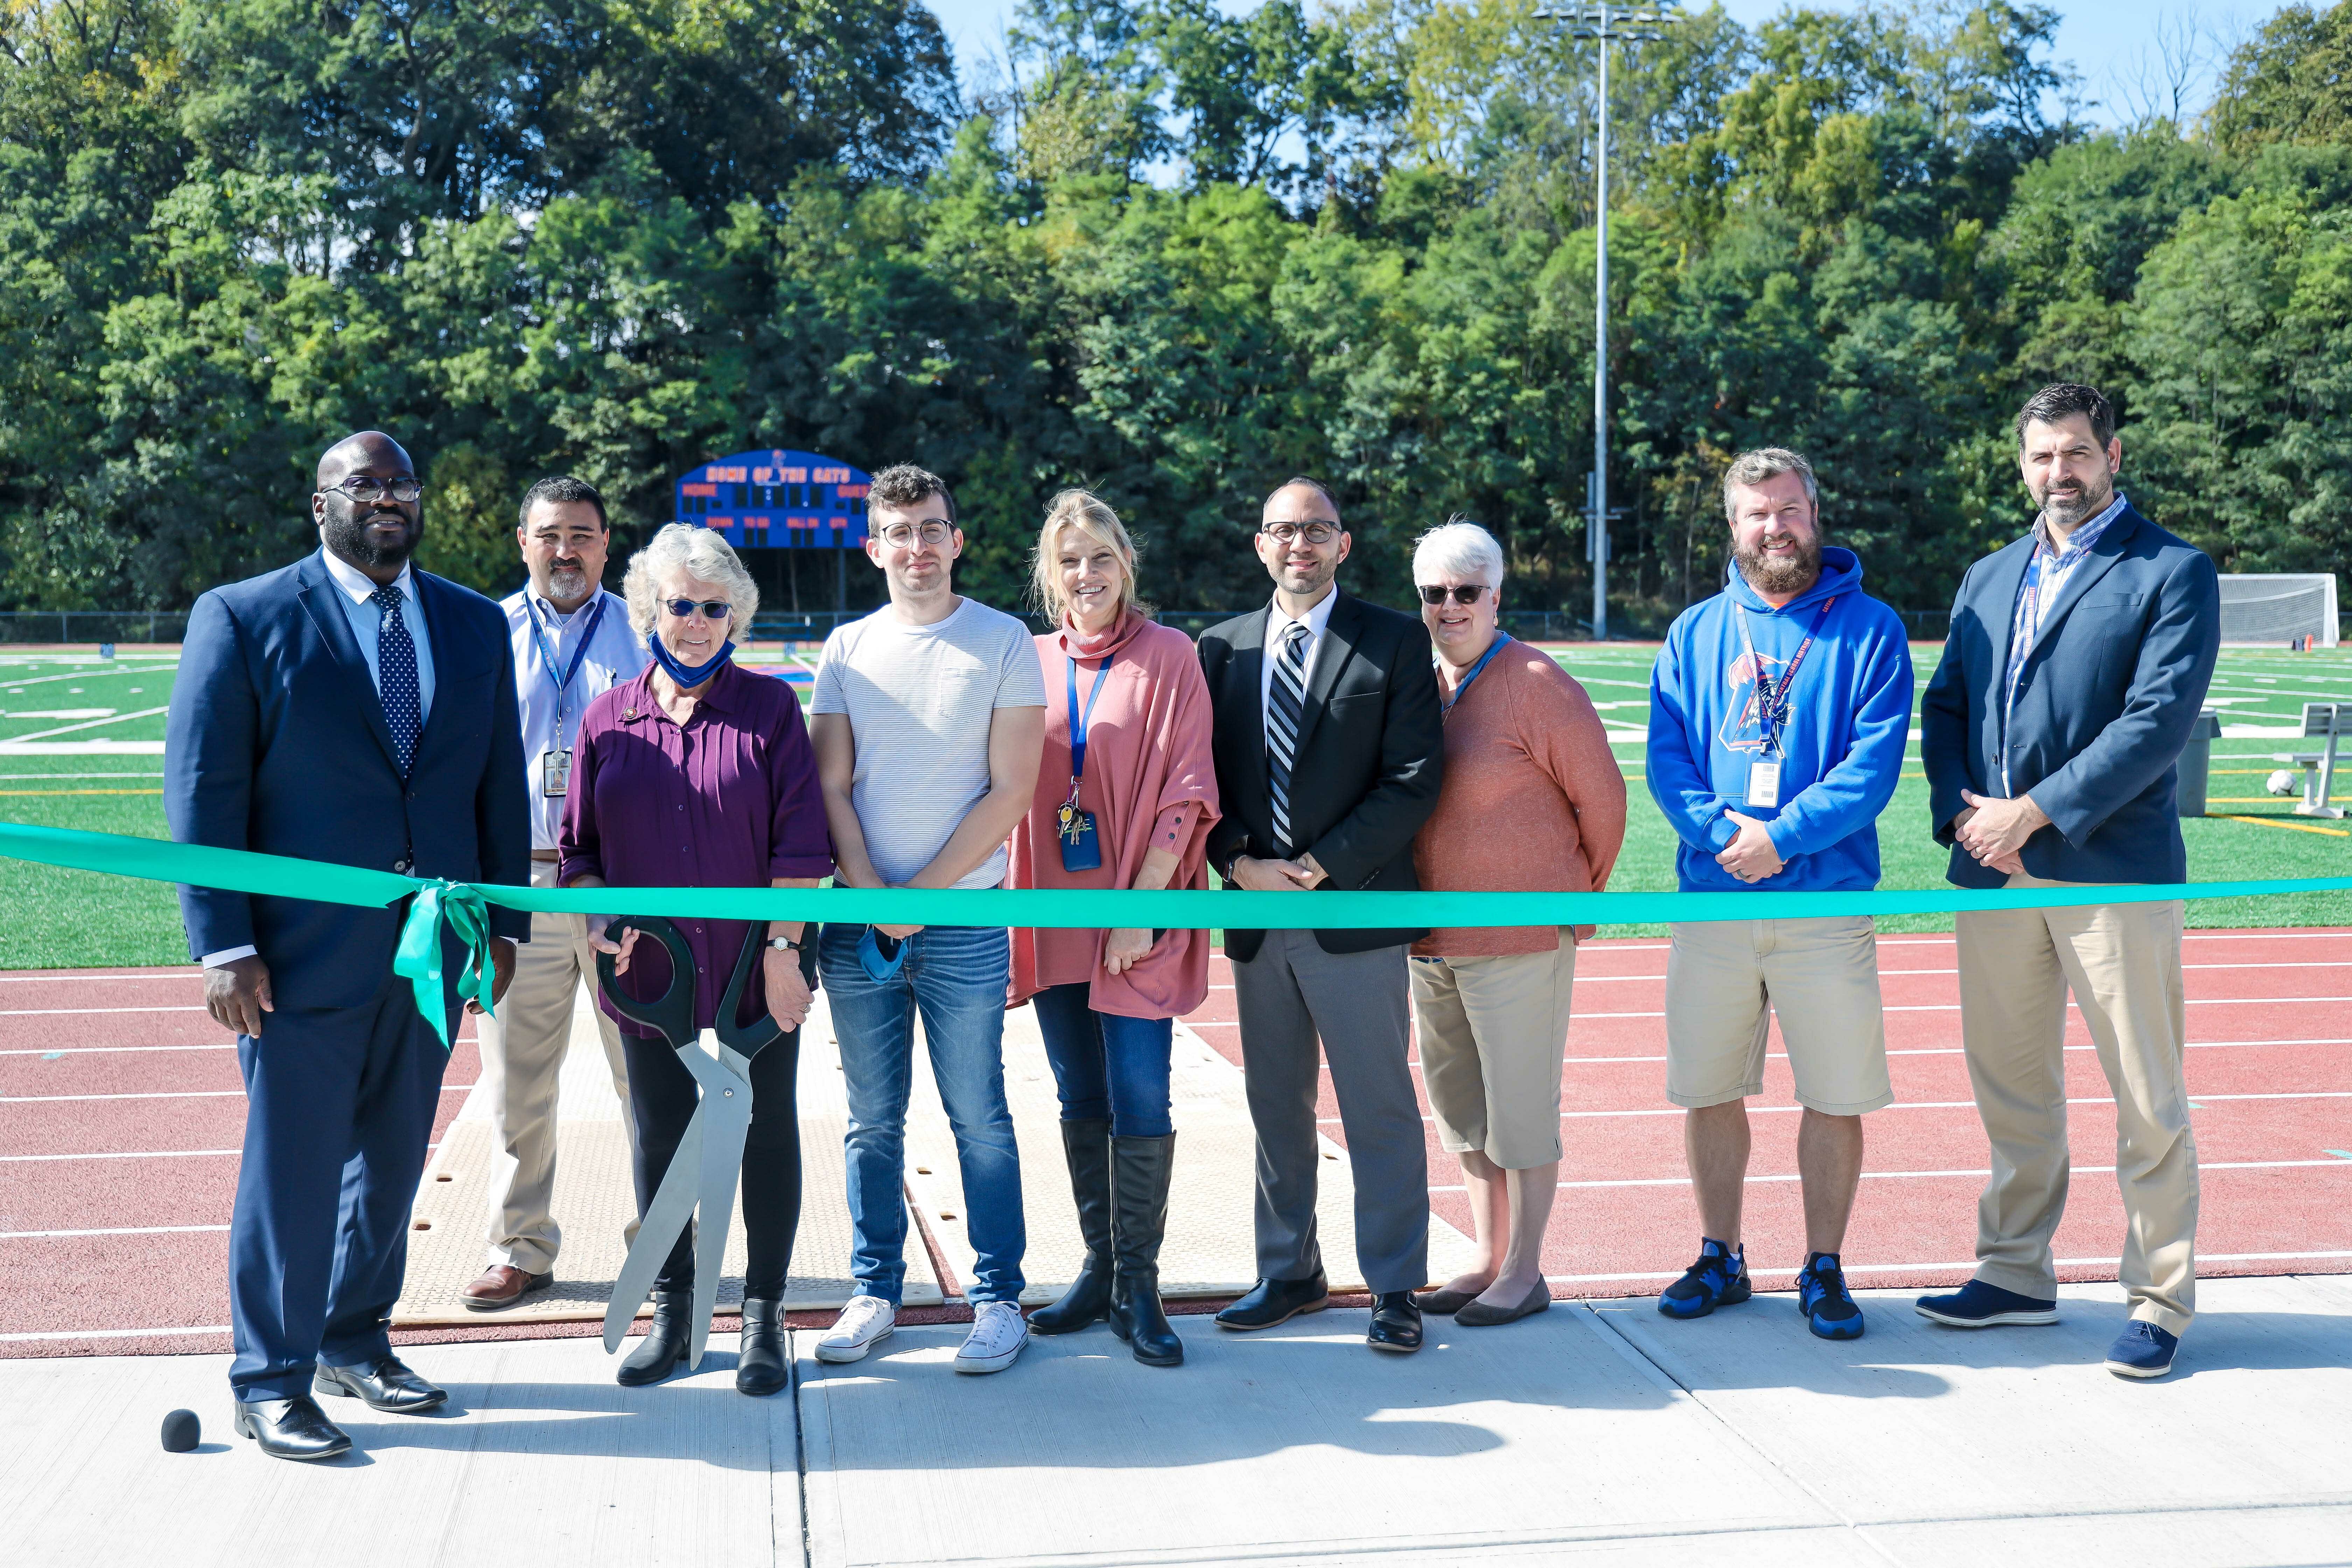 Administrators and Board Members cut ribbon on track and field